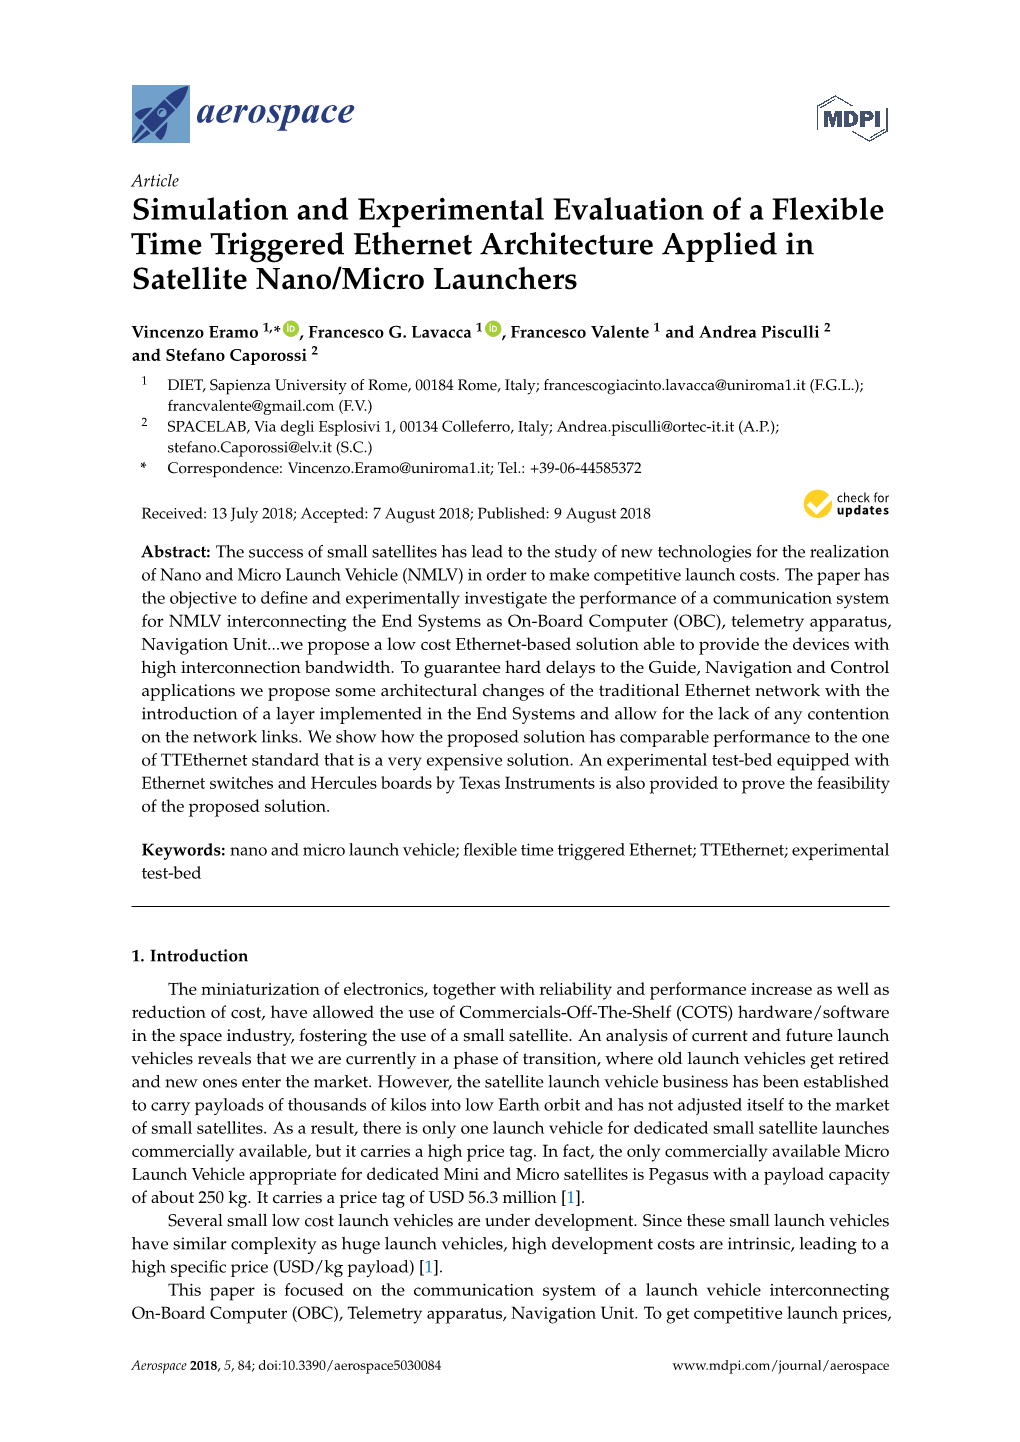 Simulation and Experimental Evaluation of a Flexible Time Triggered Ethernet Architecture Applied in Satellite Nano/Micro Launchers